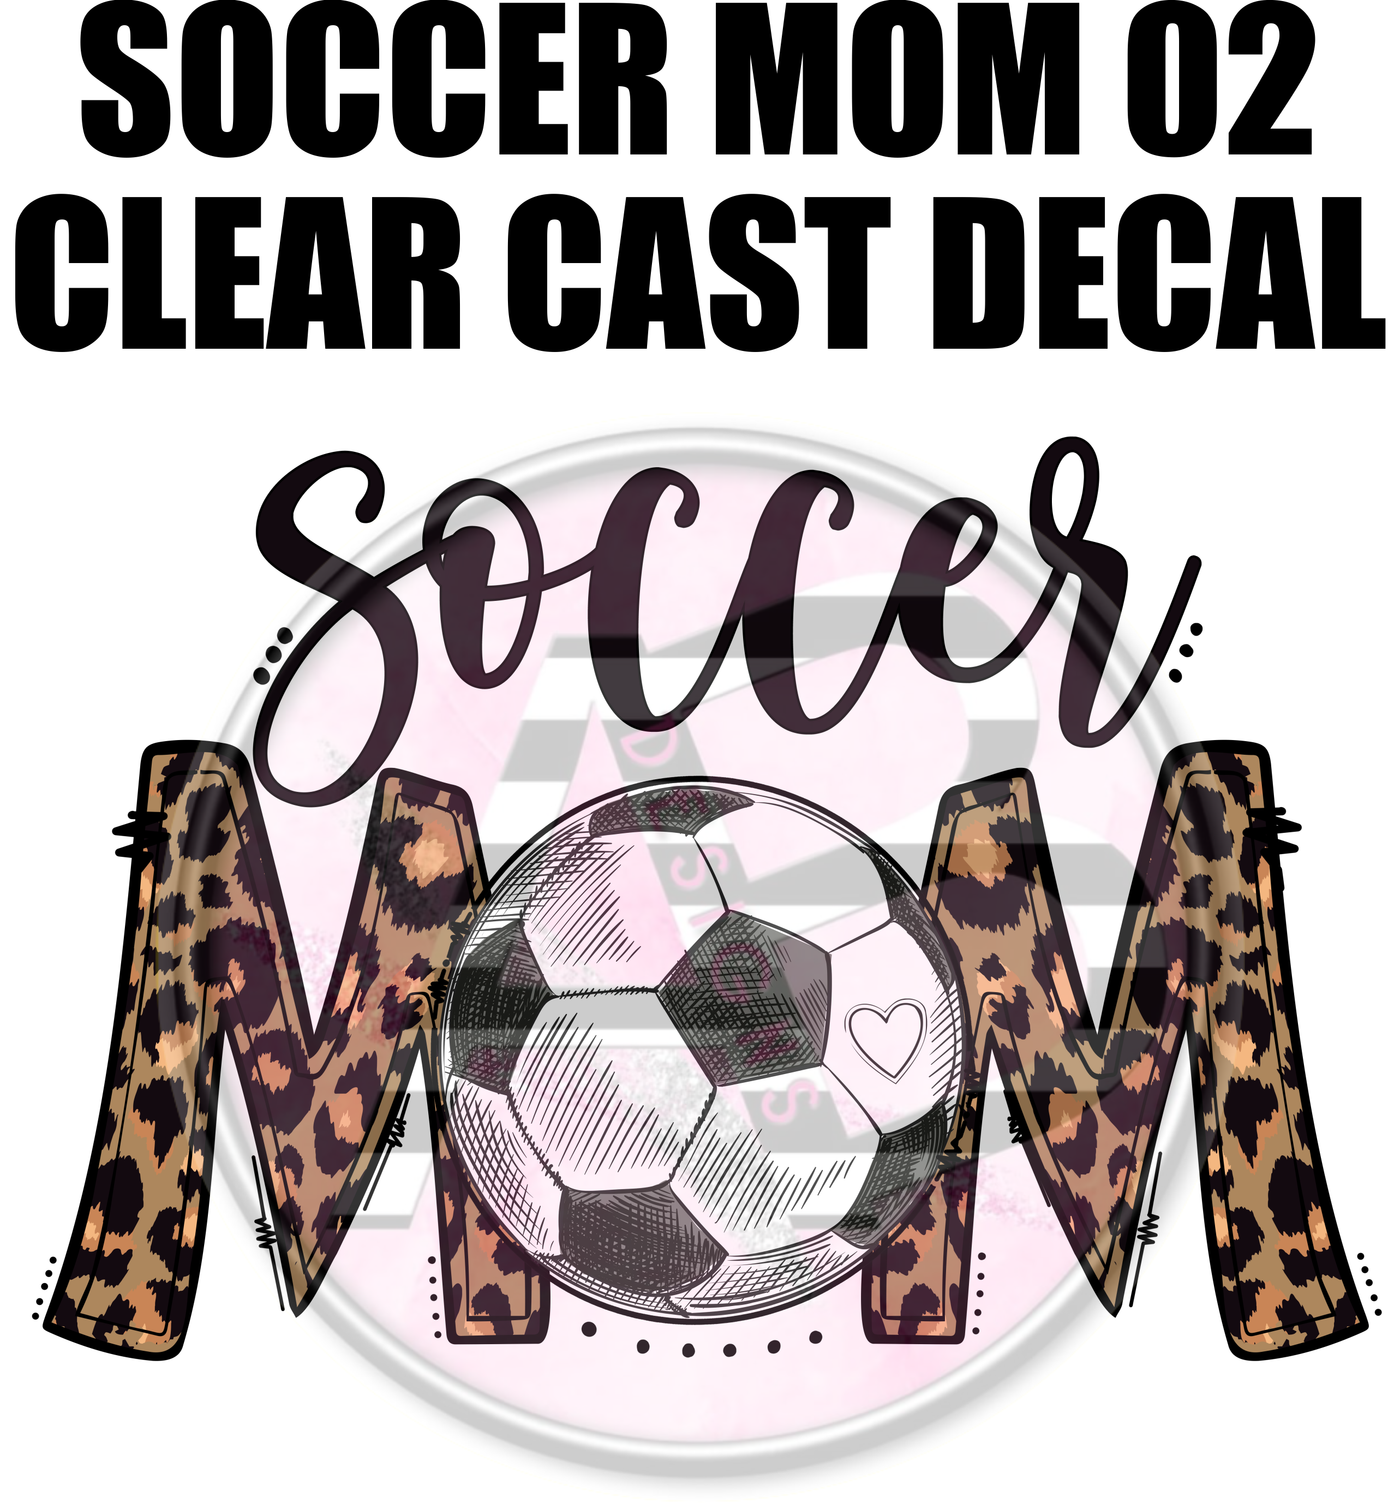 Soccer Mom 02 - Clear Cast Decal